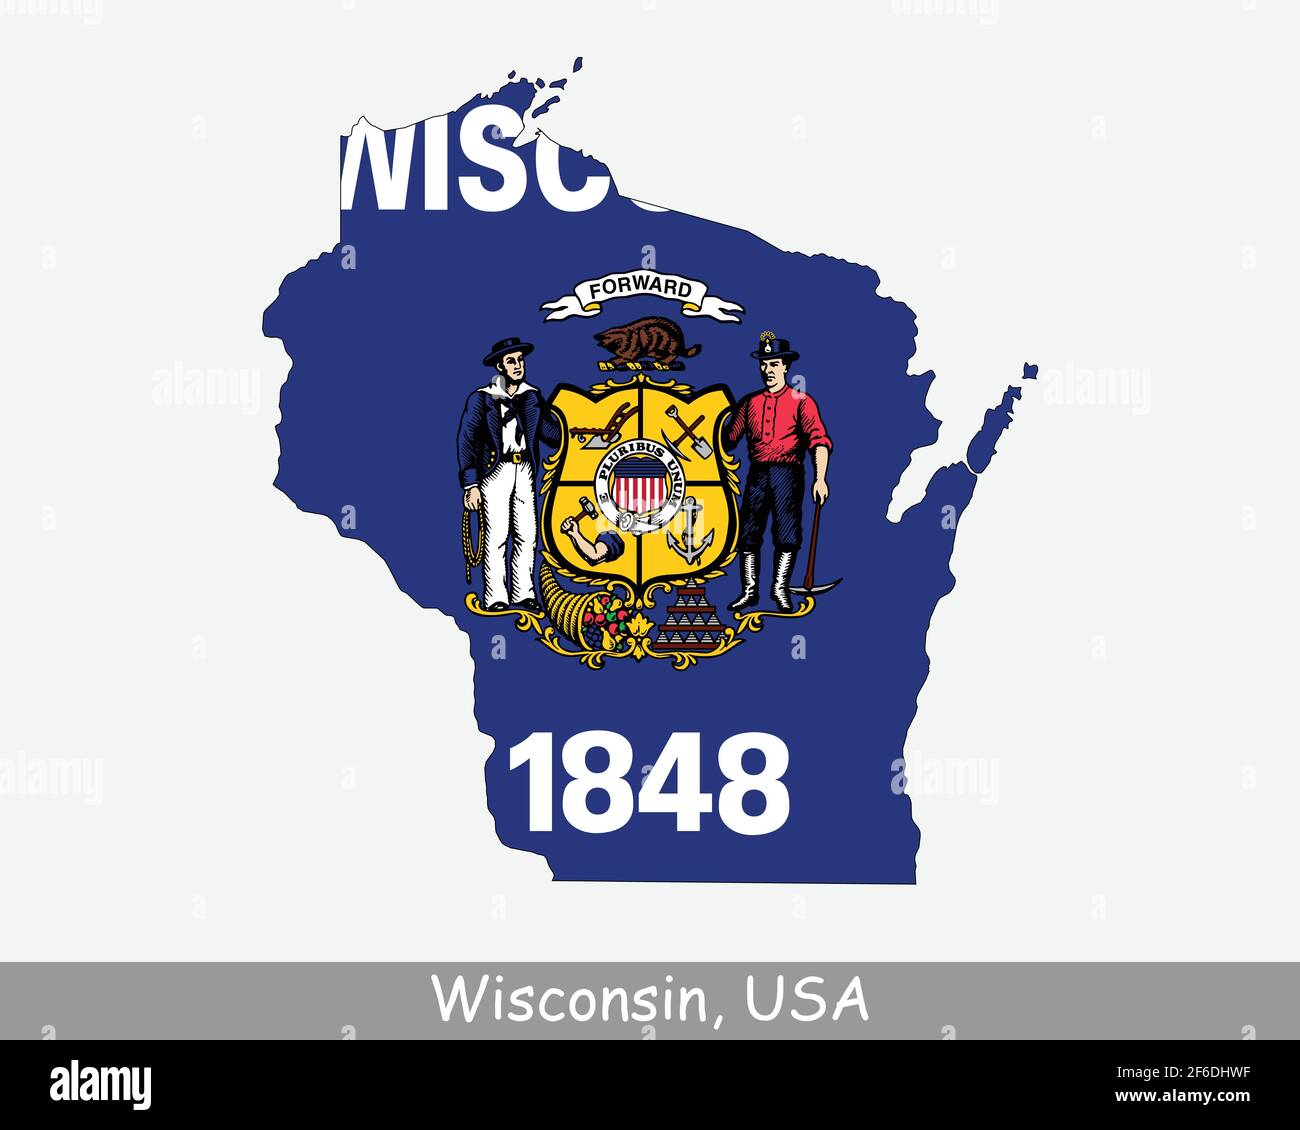 Wisconsin Map Flag. Map of WI, USA with the state flag isolated on a white background. United States, America, American, United States of America, US Stock Vector